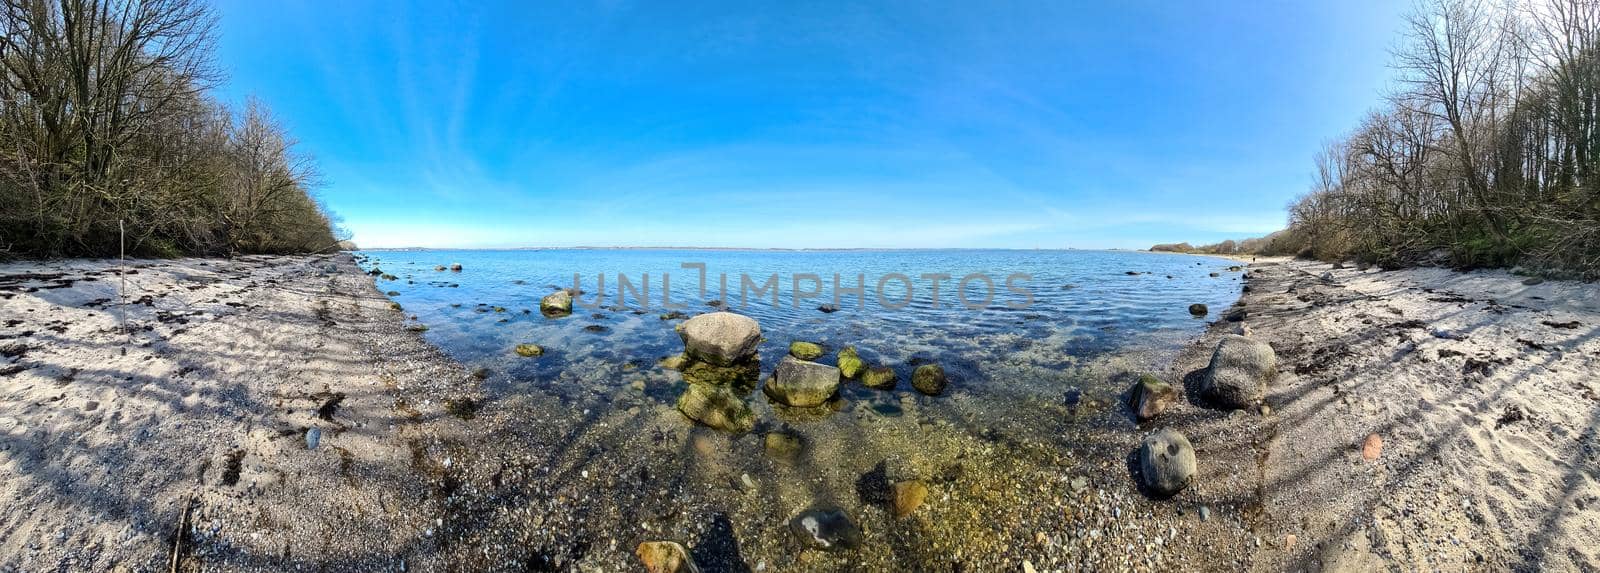 Beautiful beaches at the baltic sea on a sunny day in northern Germany. by MP_foto71